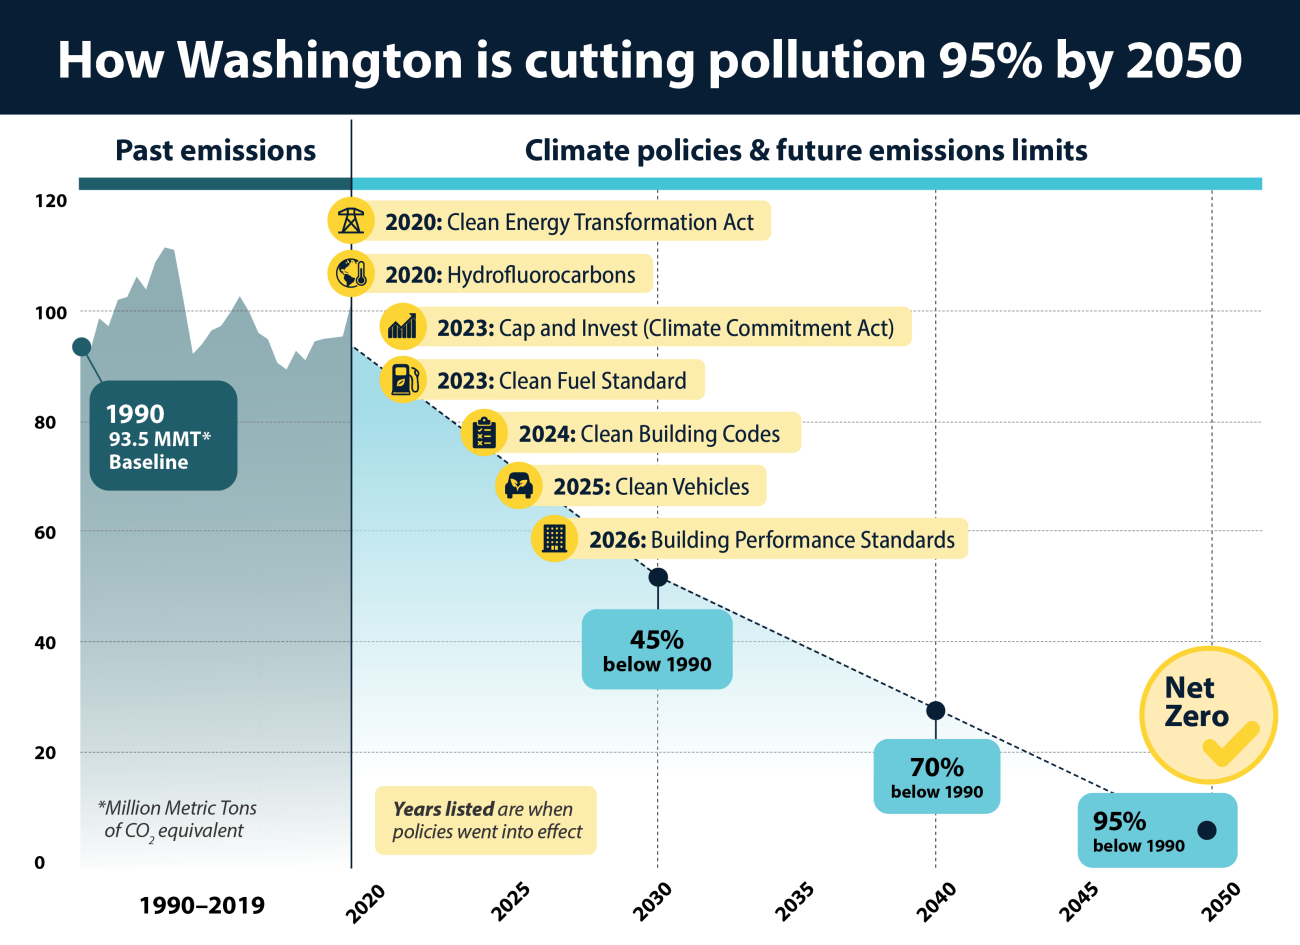 Chart showing the timeline of seven policies that will go into effect to cut pollution 95% by 2050